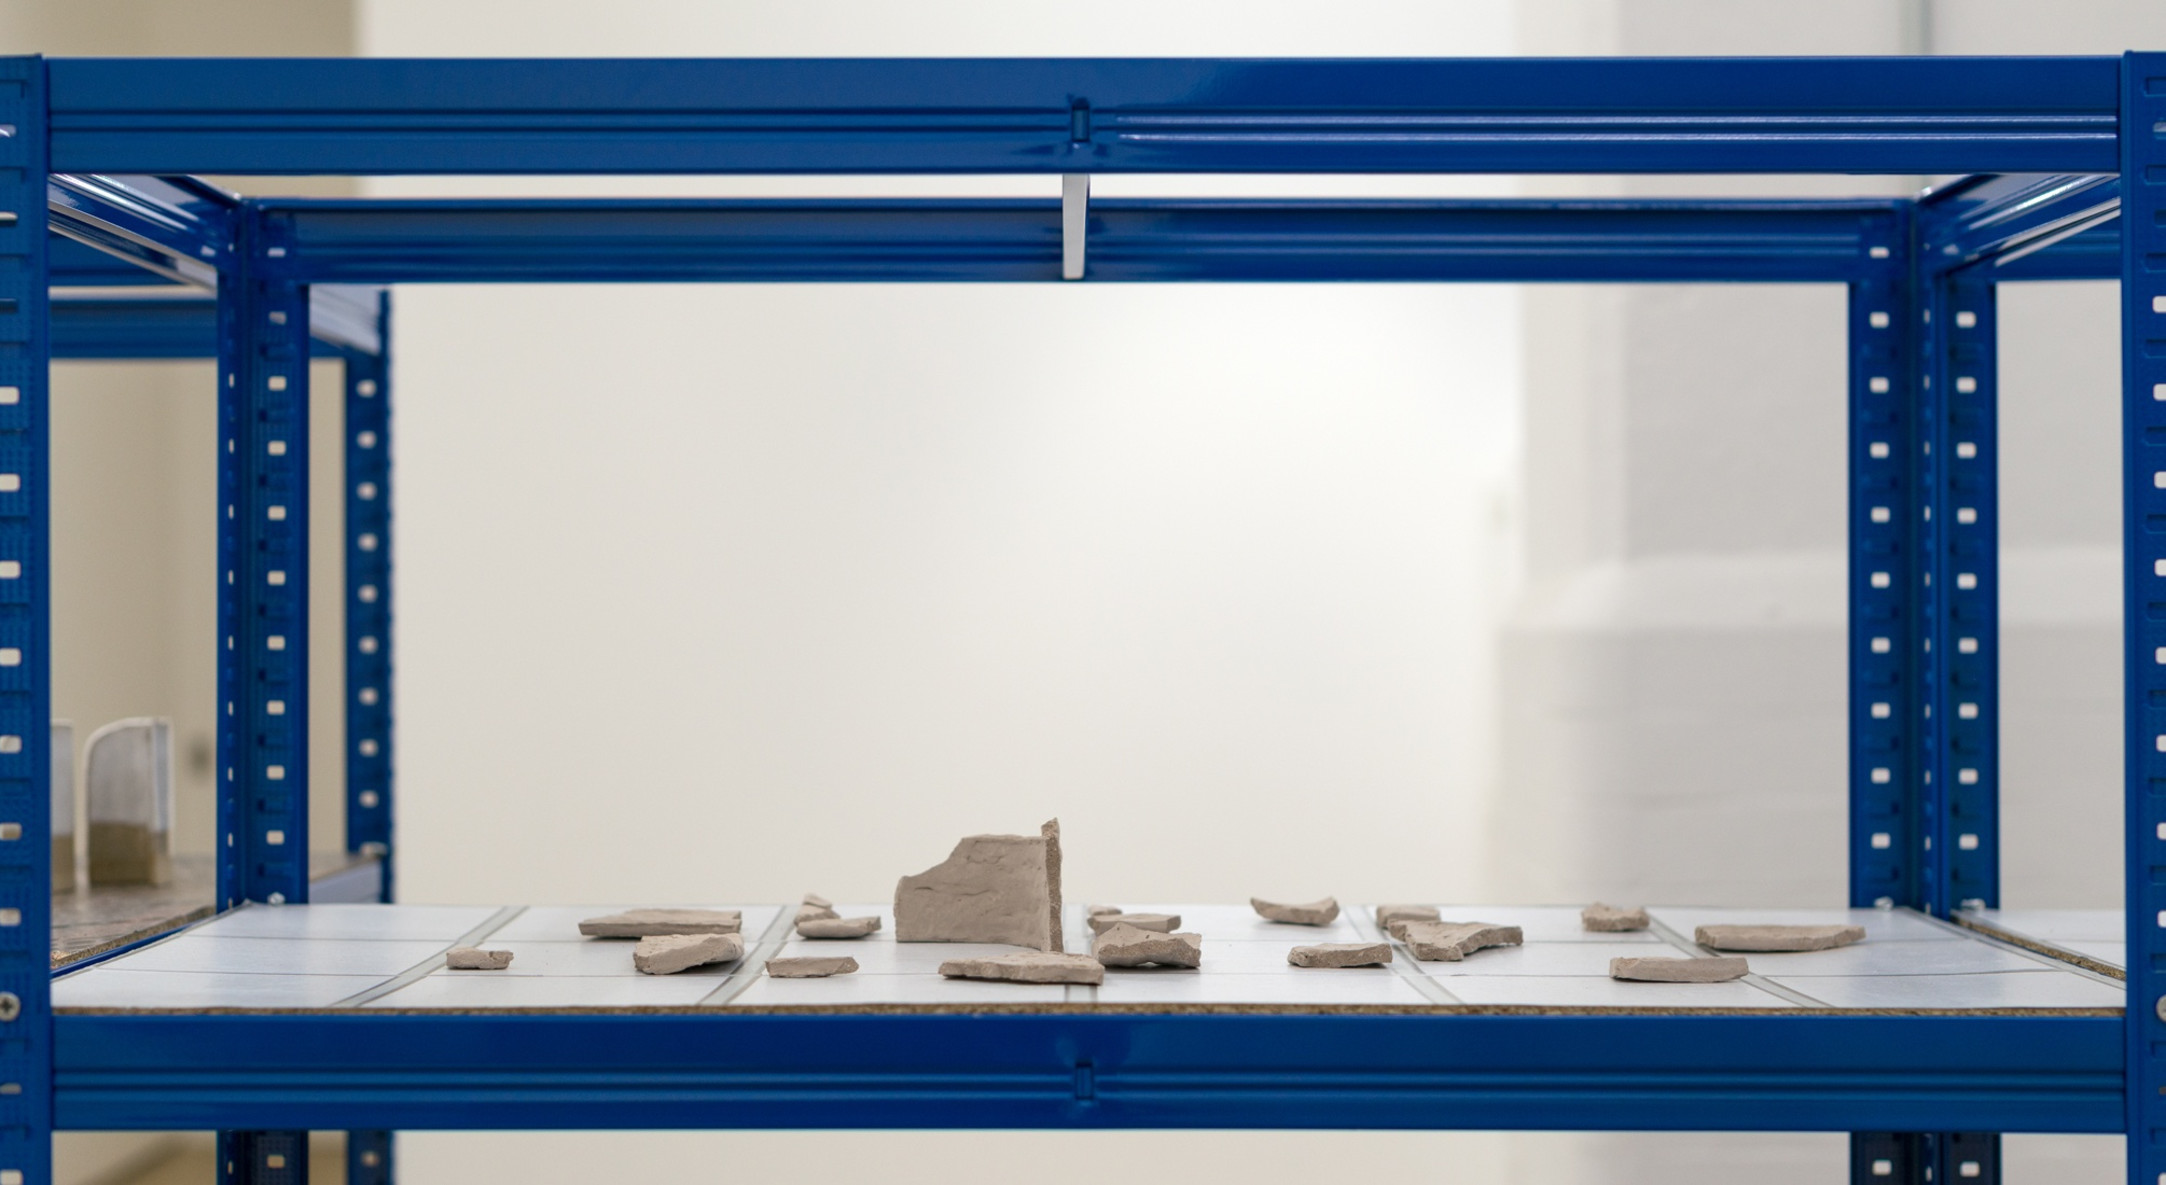 Installation view of Rachel Pimm, Resistant Materials at Hales London